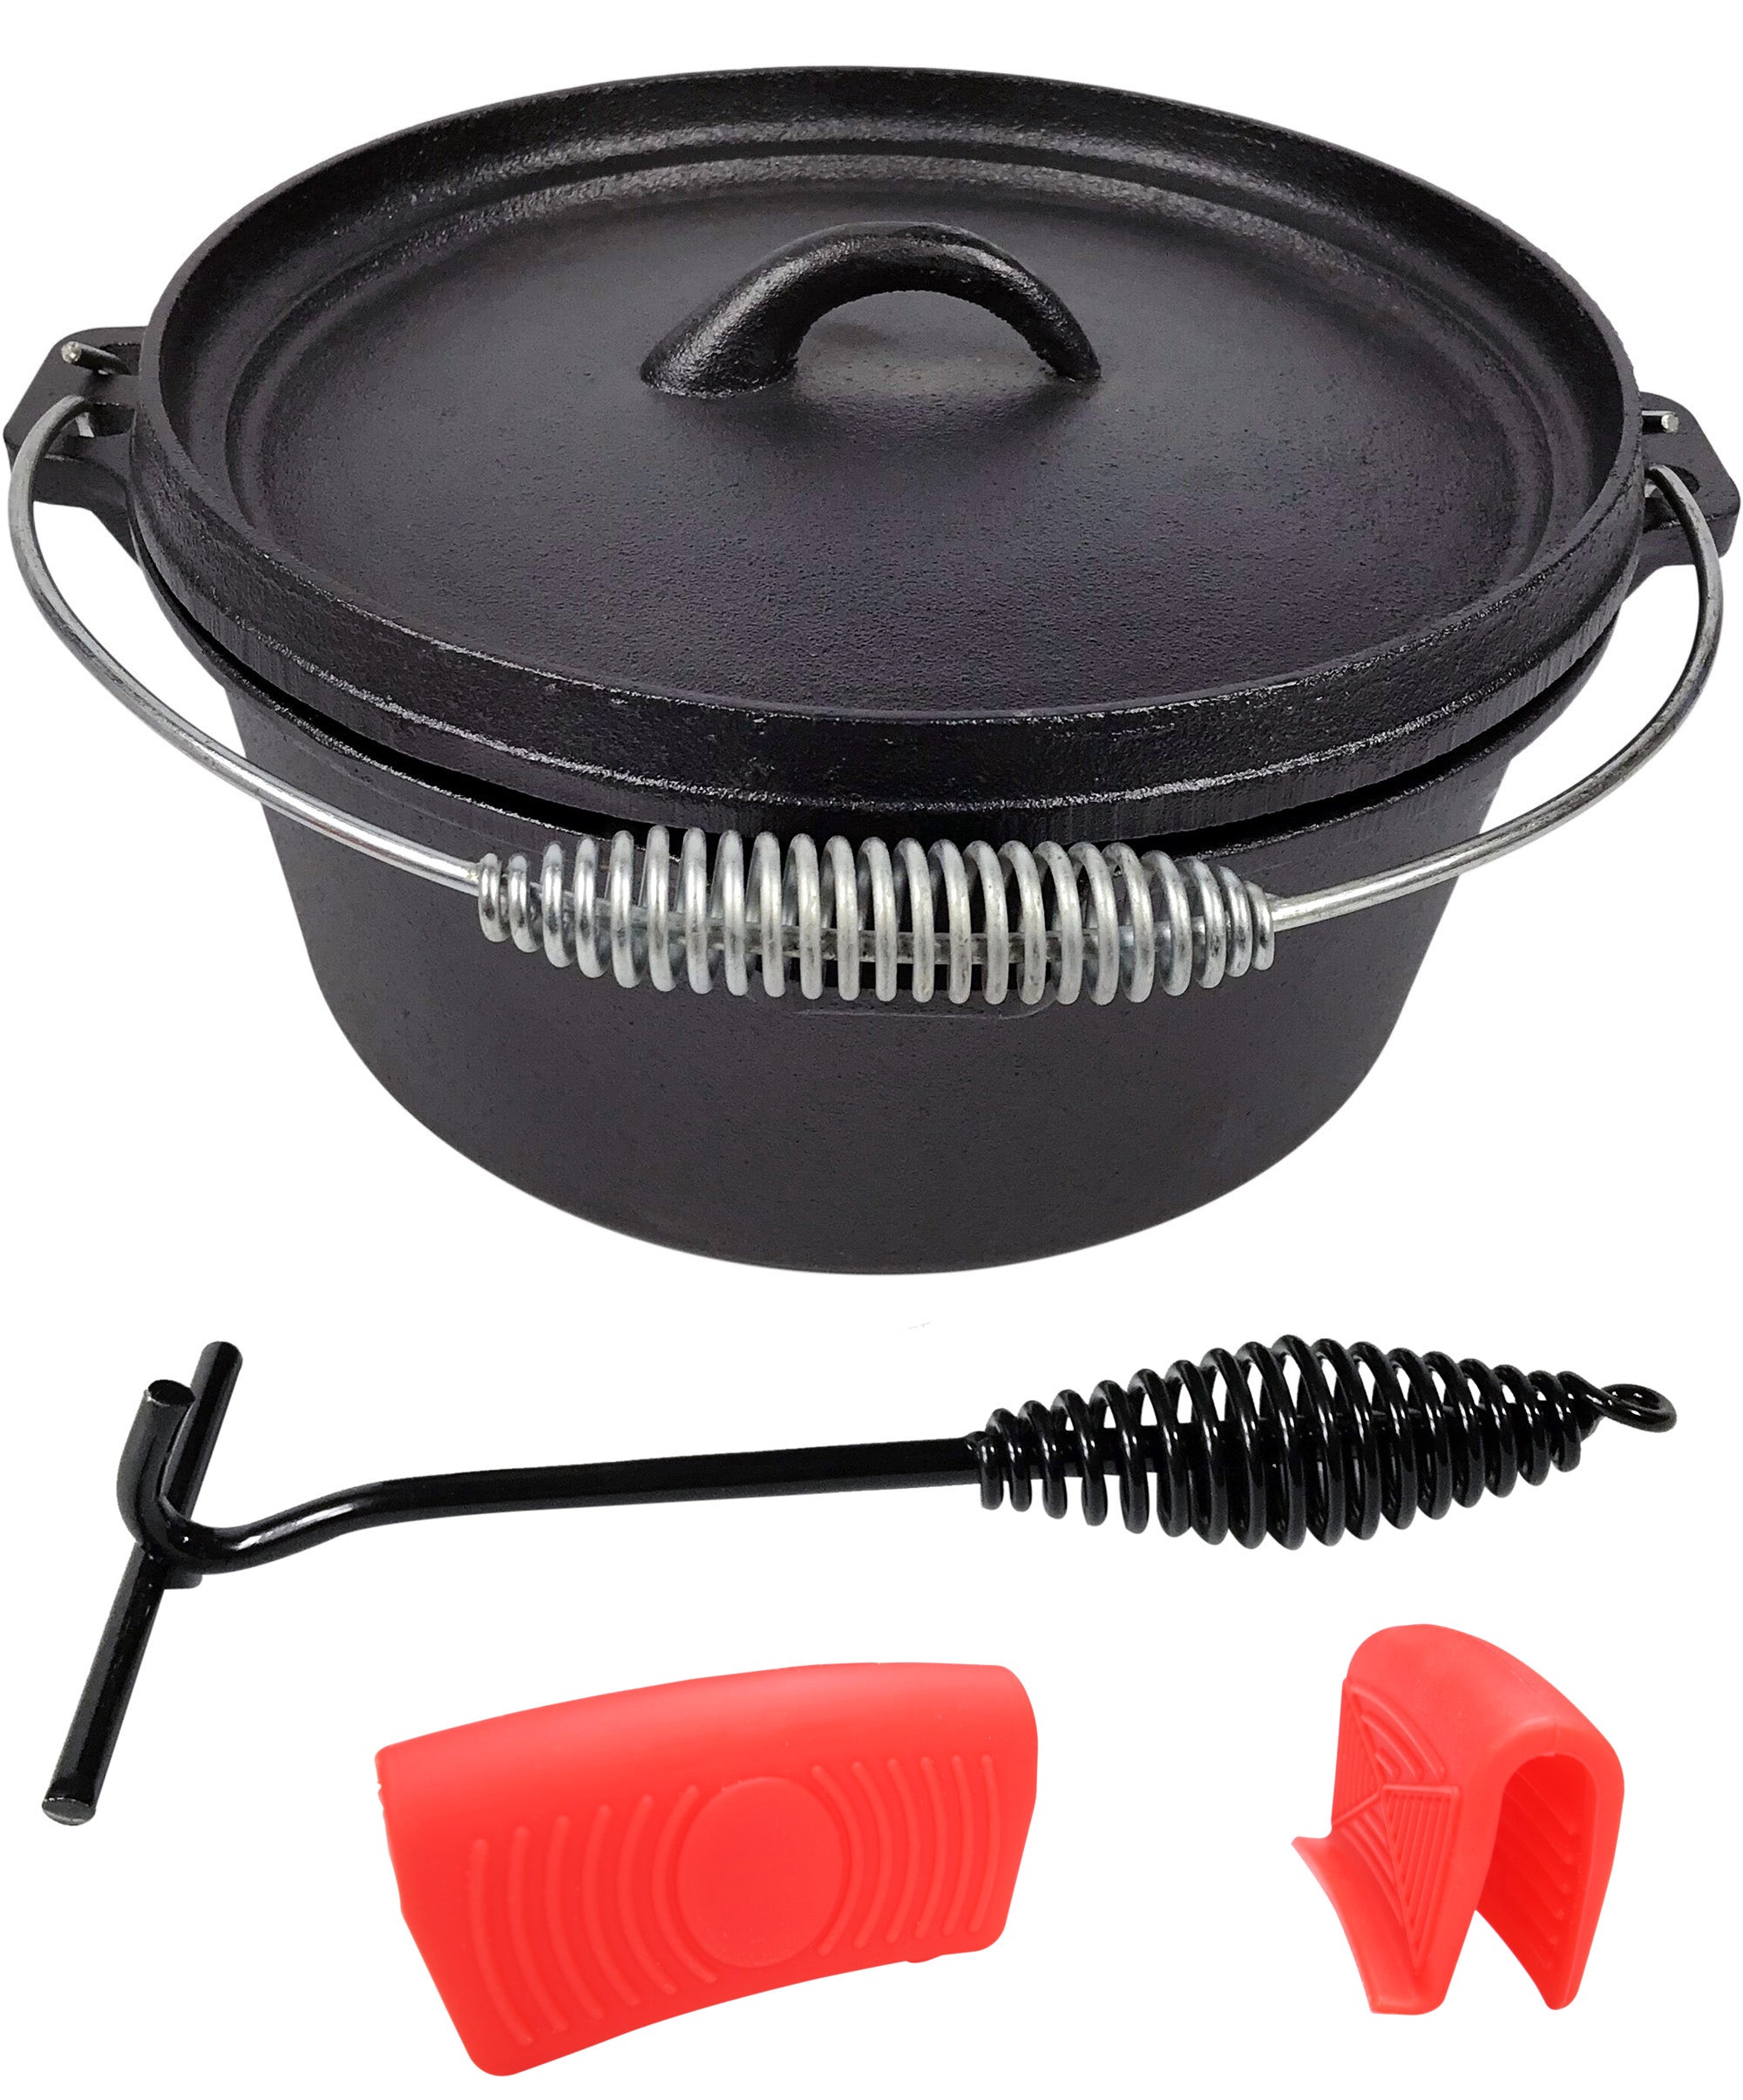 Lodge 9 Quart Cast Iron Dutch Oven. Pre Seasoned Cast Iron Pot and Lid with  Wire Bail for Camp Cooking